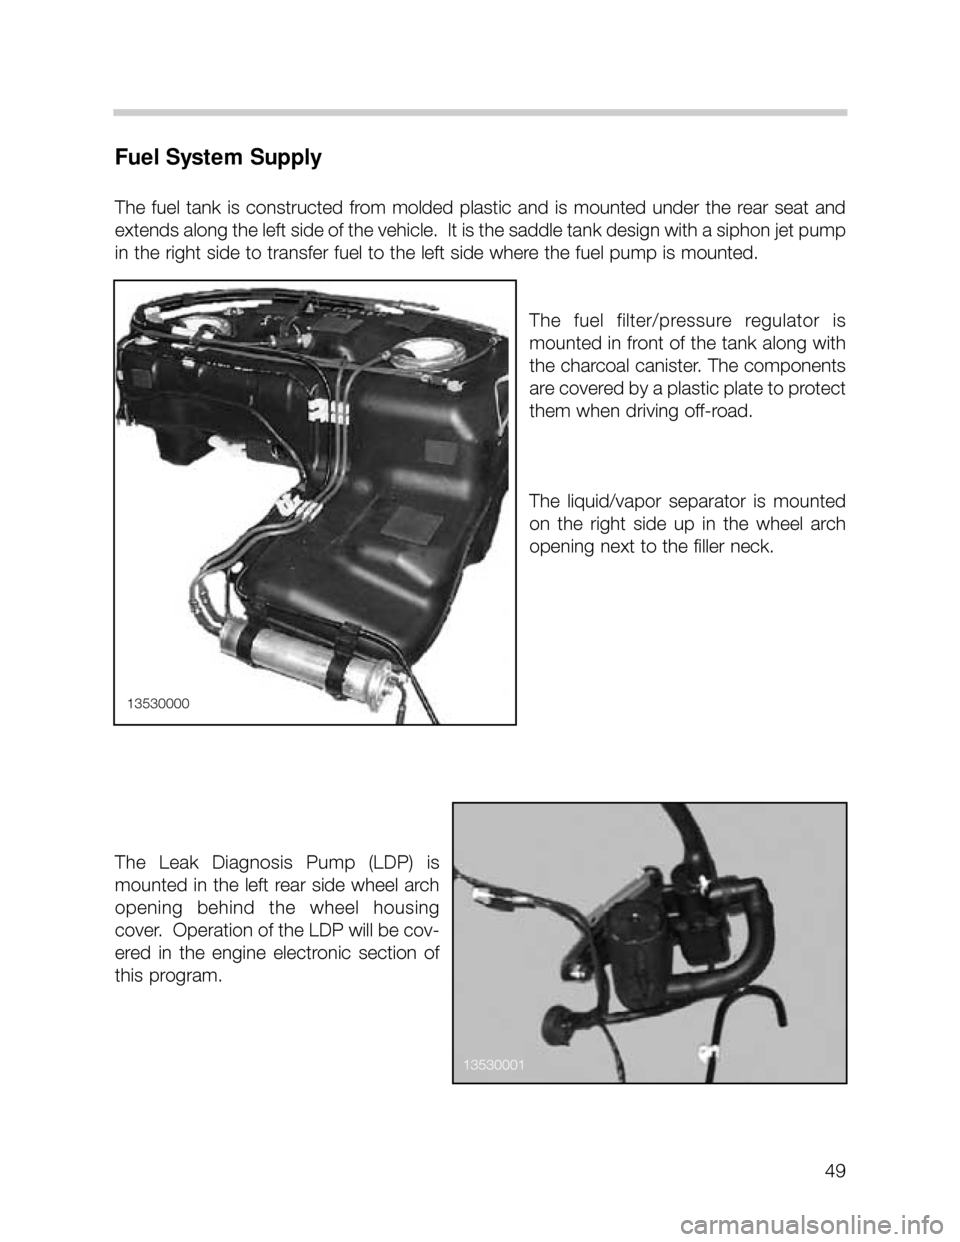 BMW X5 2003 E53 Workshop Manual 49
Fuel System Supply
The  fuel  tank  is  constructed  from  molded  plastic  and  is  mounted  under  the  rear  seat  and
extends along the left side of the vehicle.  It is the saddle tank design w